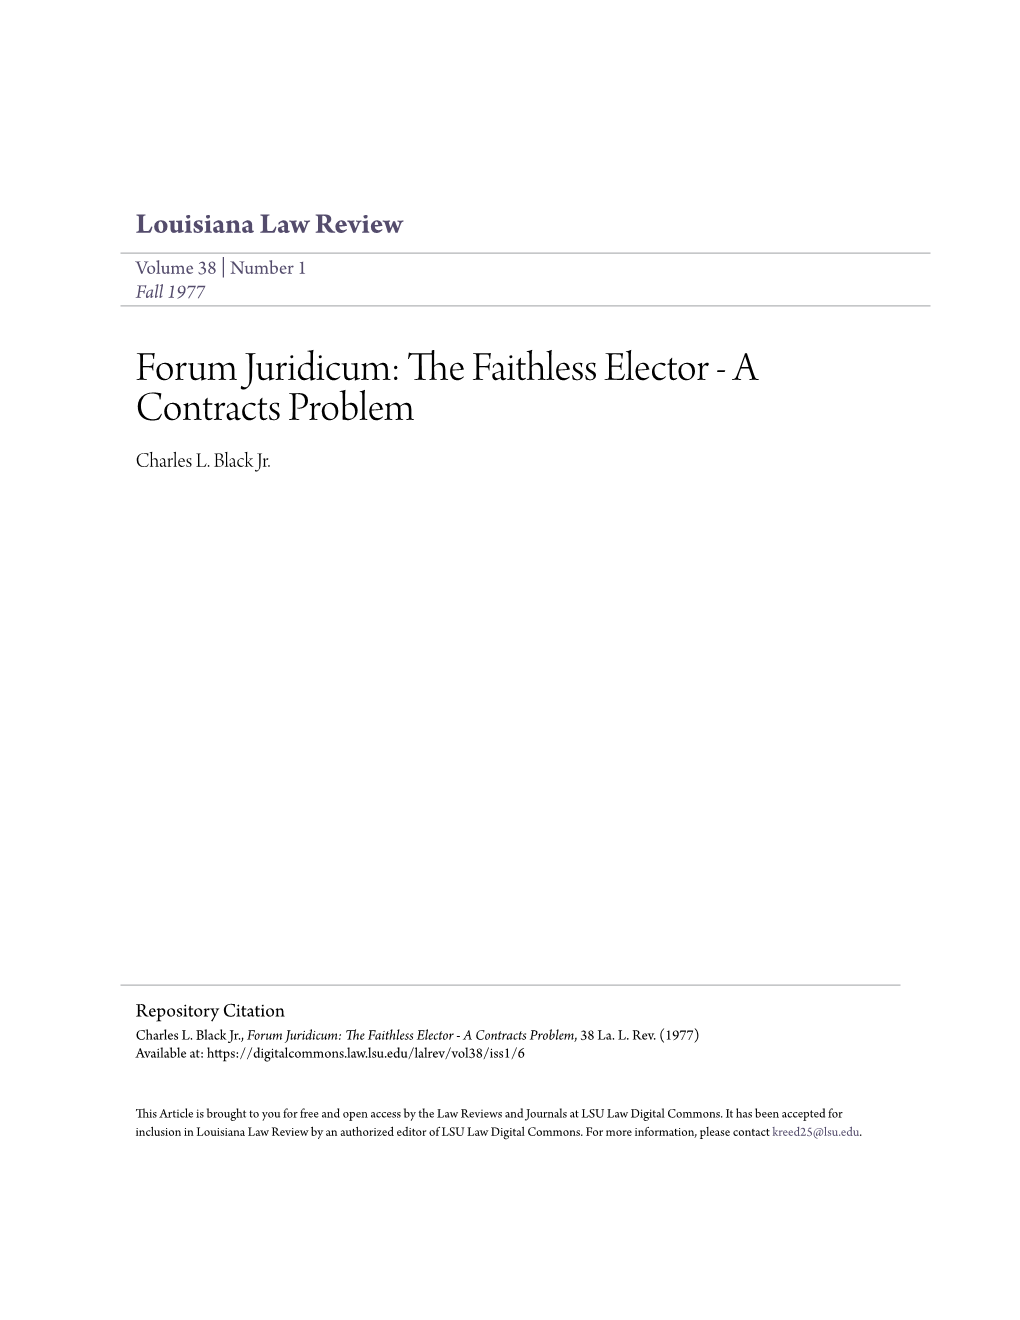 The Faithless Elector - a Contracts Problem, 38 La